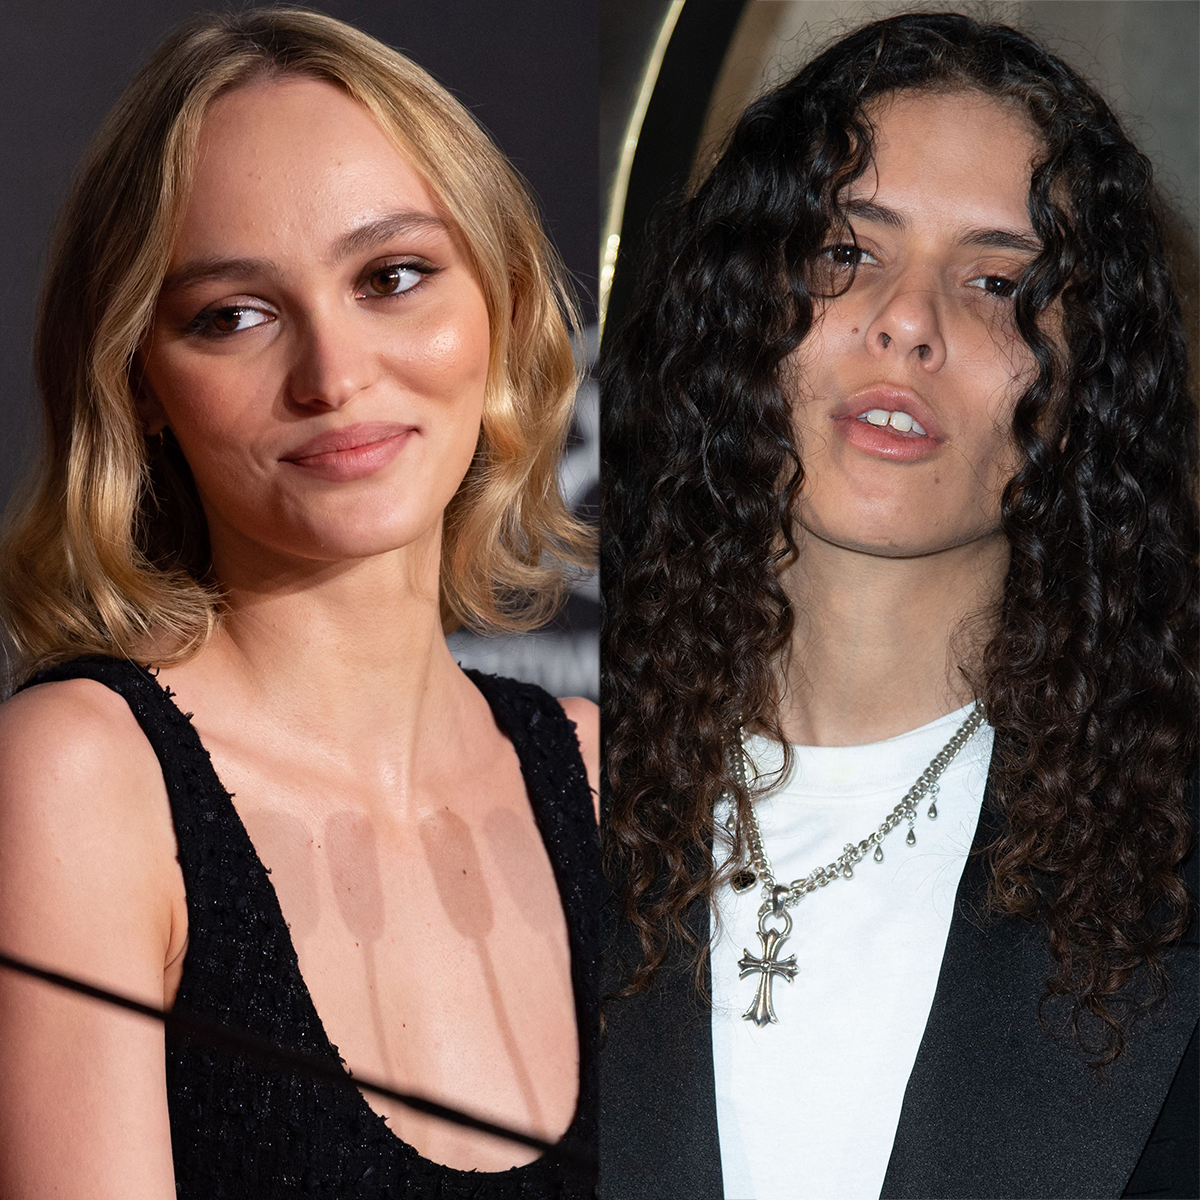 Lily-Rose Depp Shows Her Blossoming Love for Girlfriend 070 Shake